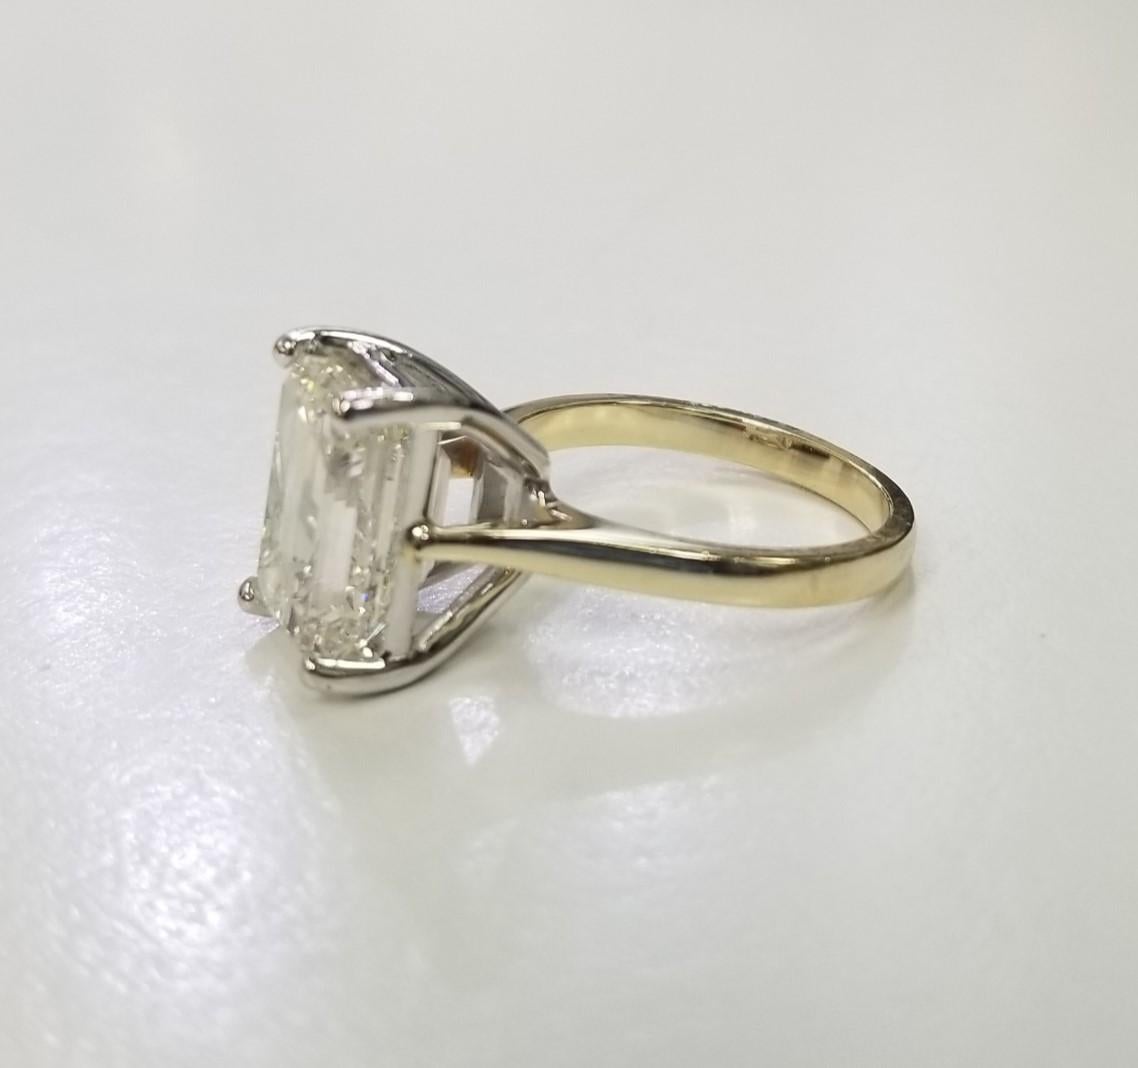 GIA Certified 5.02cts. Emerald Cut Classic Diamond set in 14k gold 
*Motivated to Sell – Please make a Fair Offer*
Specifications:
    main stone: Diamond  5.02cts. Emerald Cut
    certification: GIA Certified
    color: K
    clarity: SI1 
   